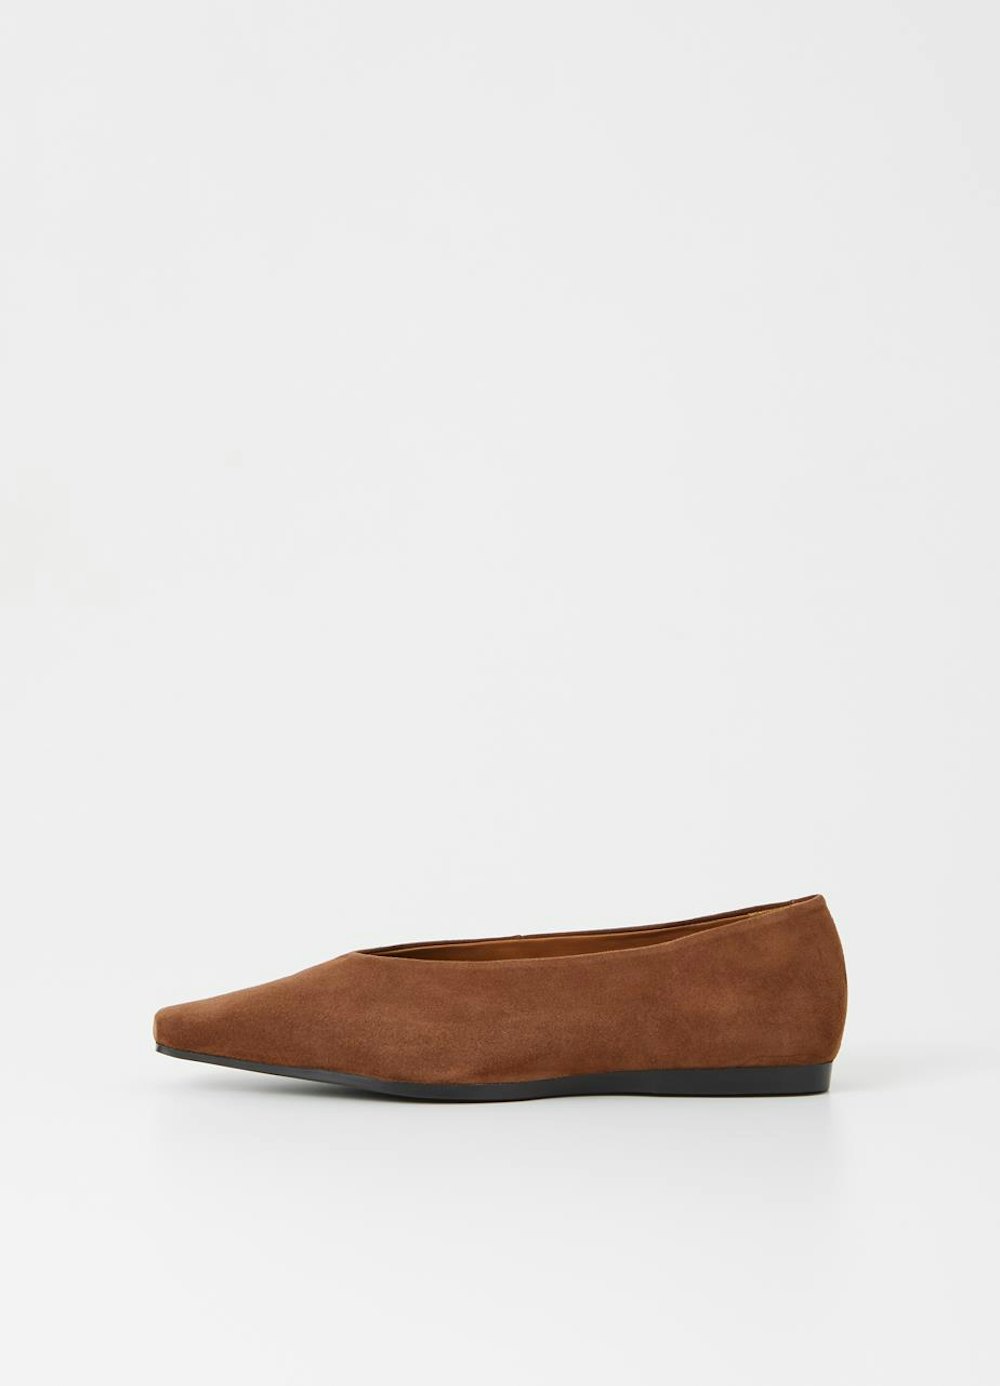 Wiolette Shoes in Brown